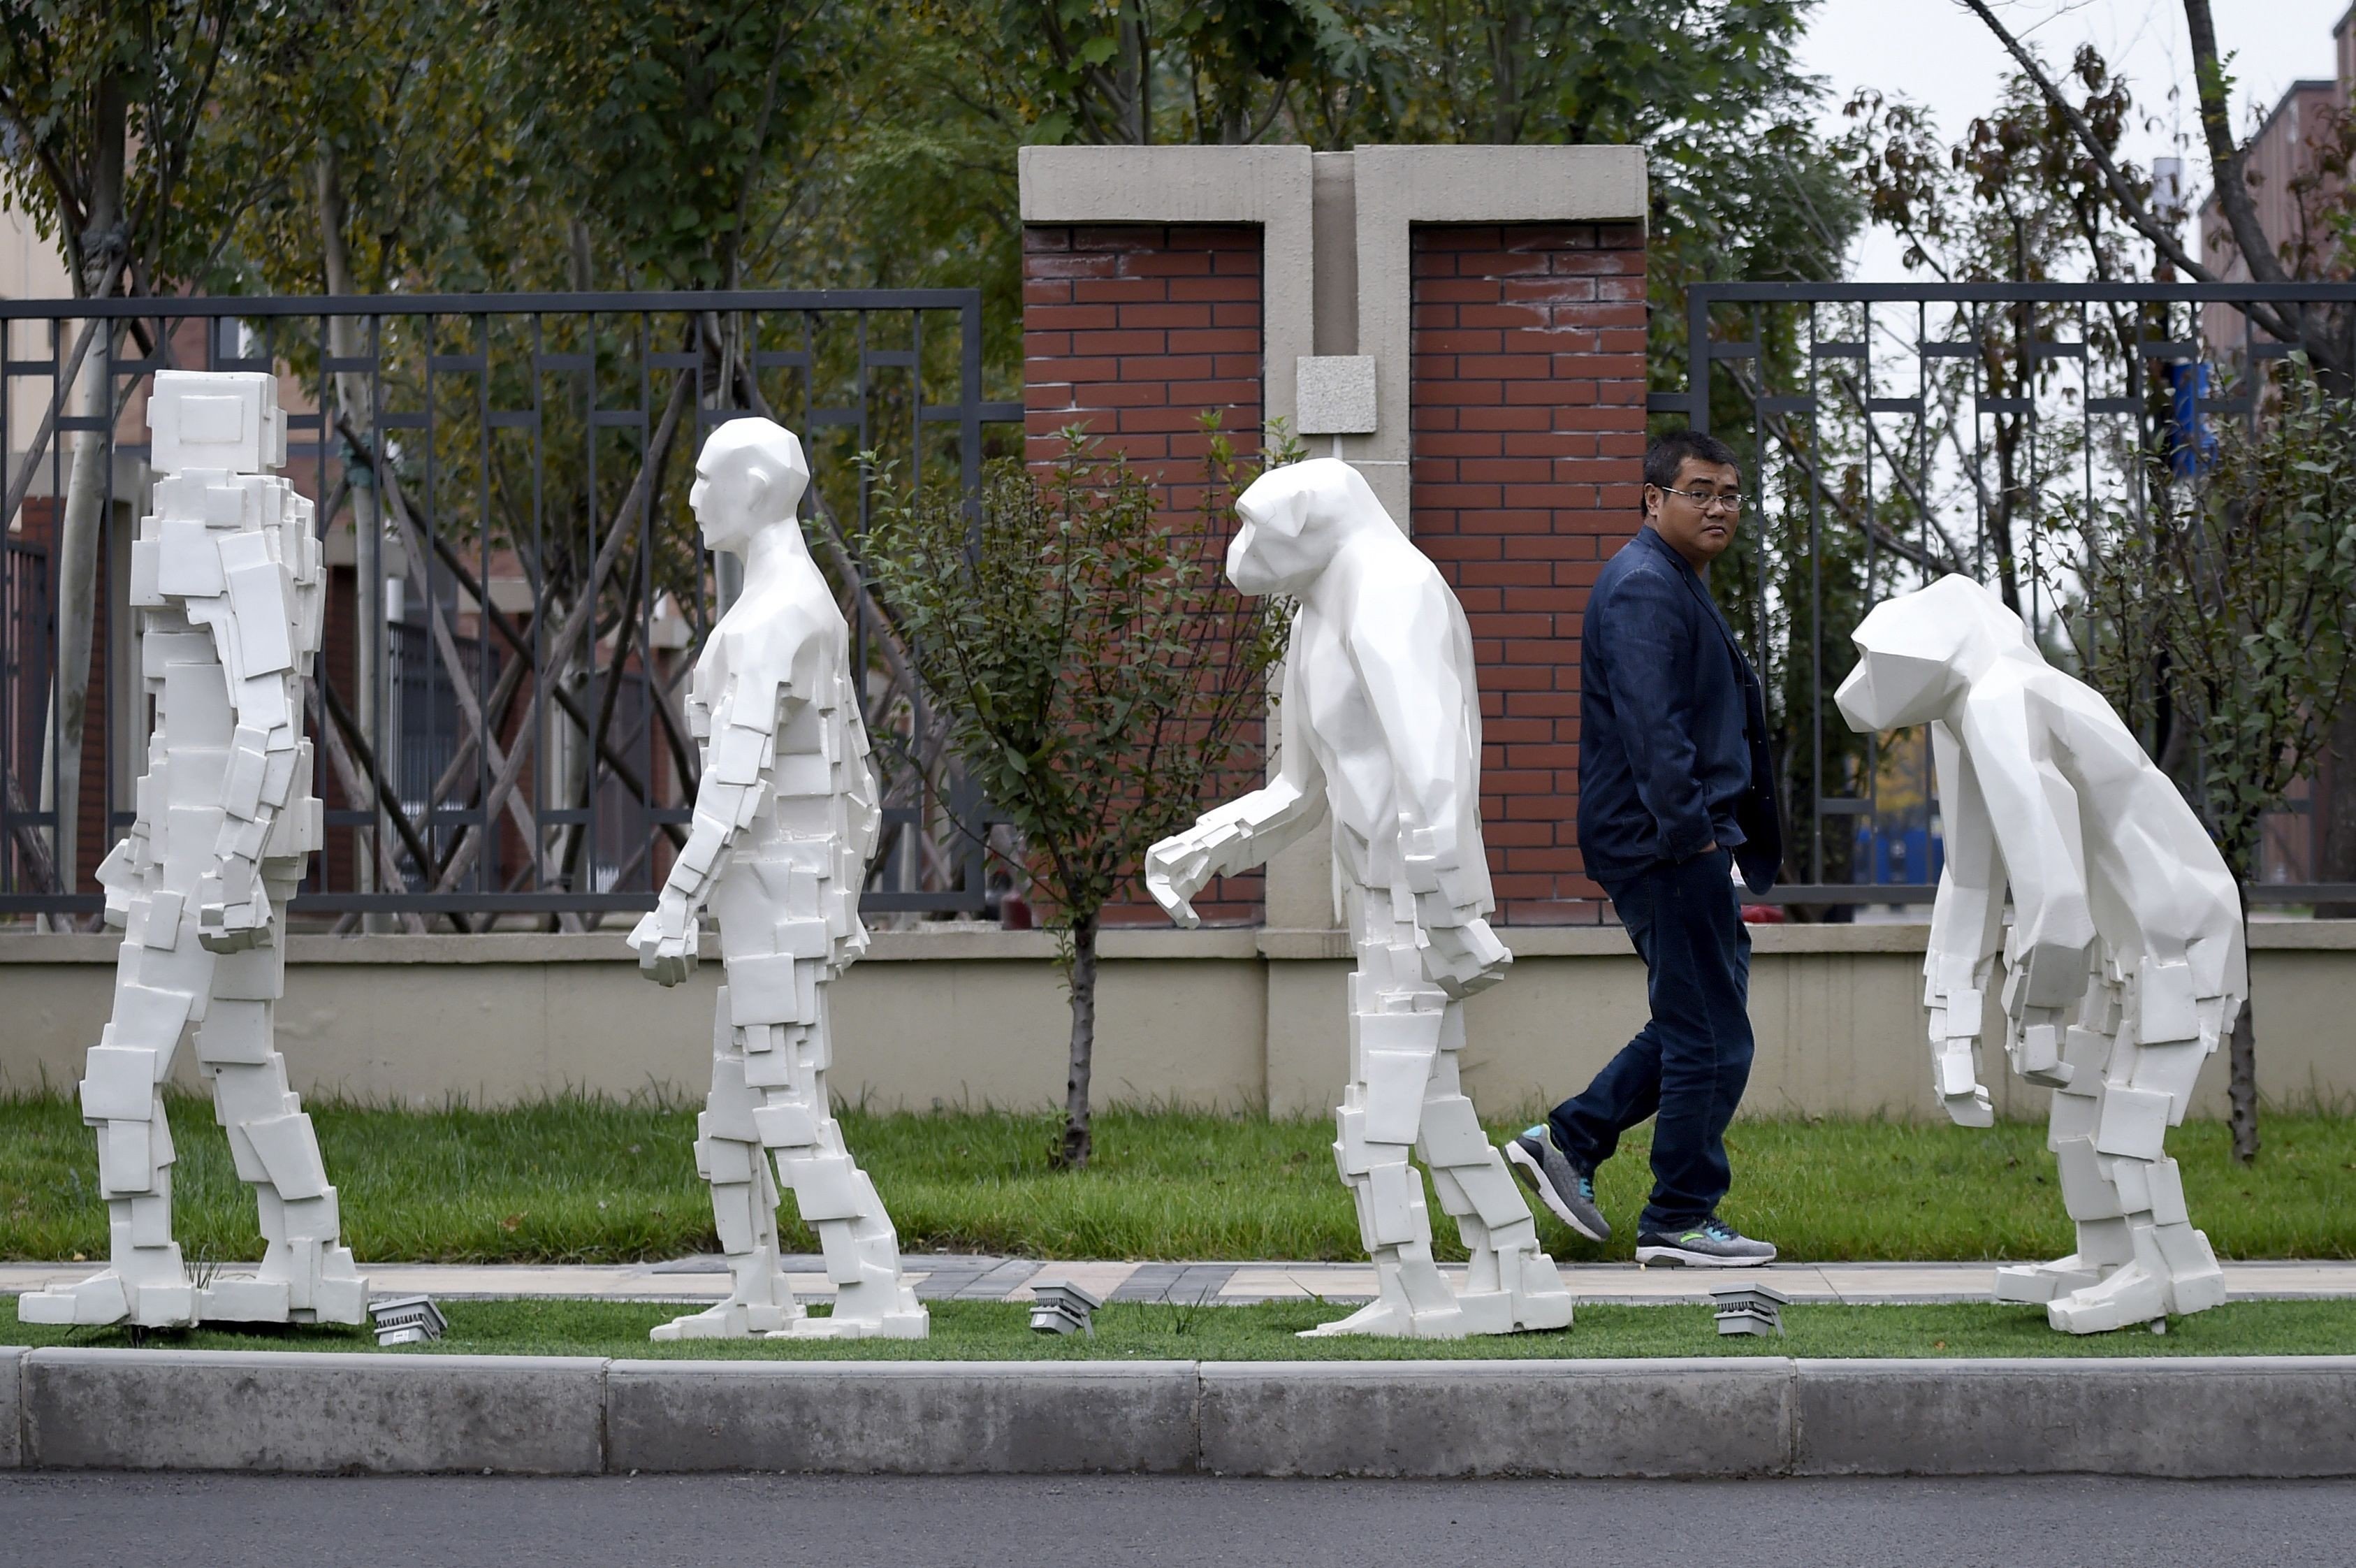 A man walks past sculptures outside Xianghe Robot Industry Port in China’s Hebei province in October 2017. The Made in China 2025 plan has ruffled feathers in the West, but it will take a commitment of time, talent and money for the country to become a true technology leader. Photo: AFP